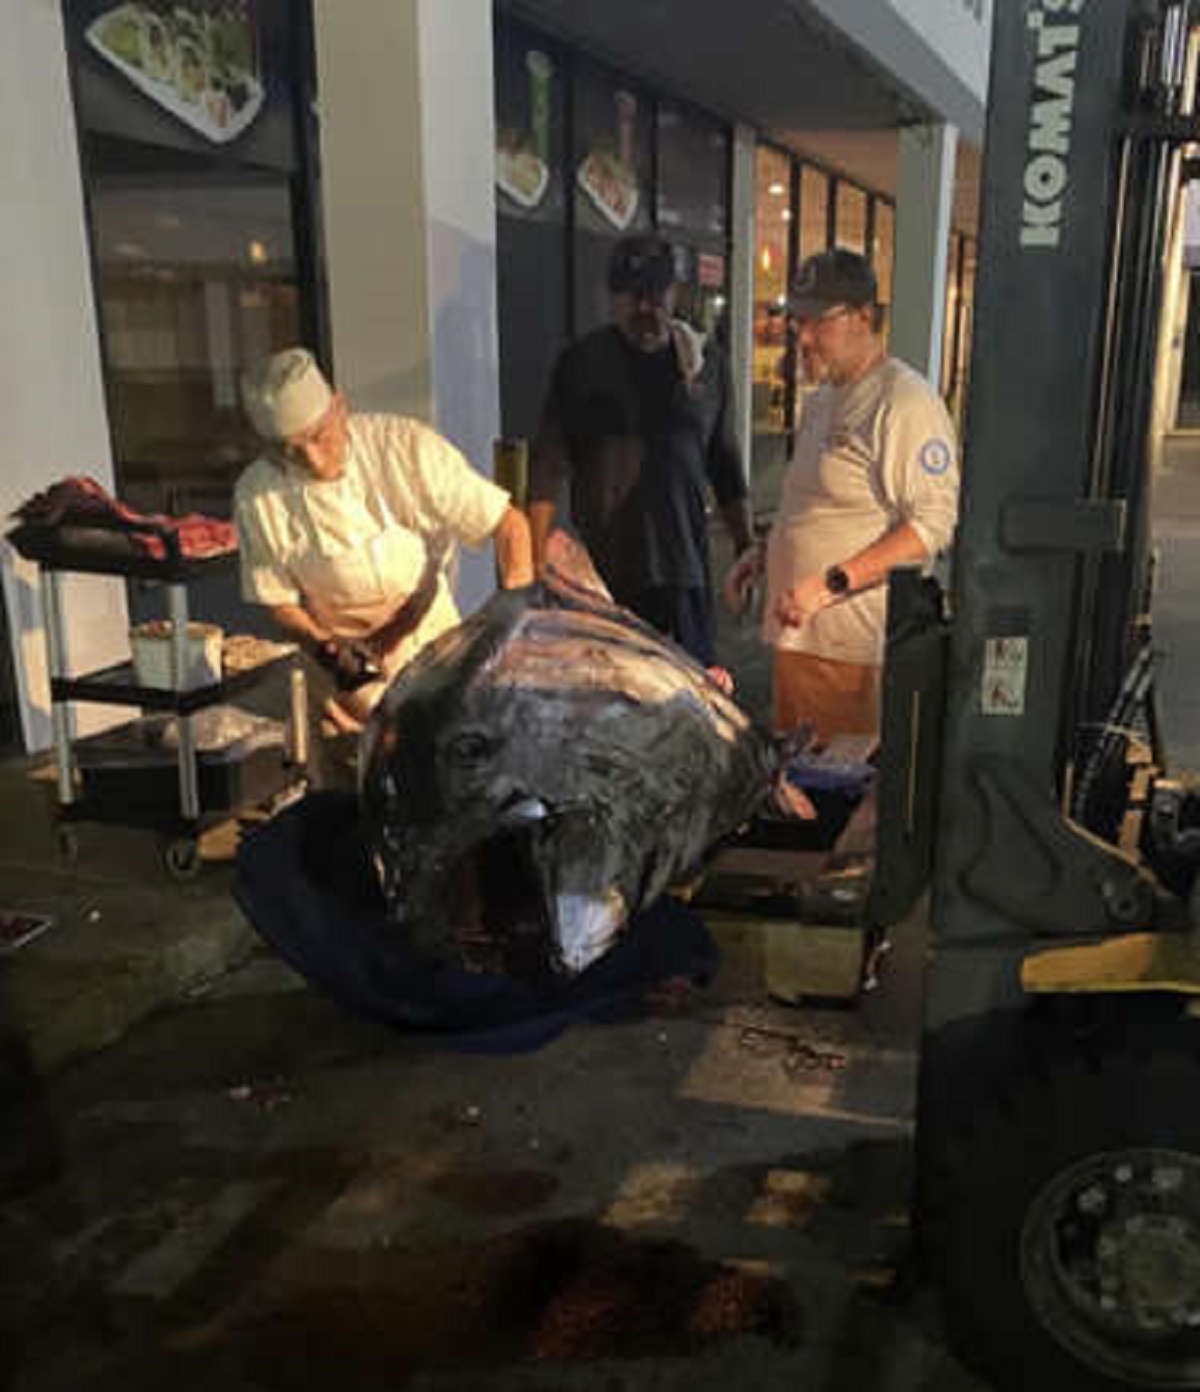 You wanted some fresh sushi? Sushi restaurant staff carving up giant 700 pound bluefin tuna.